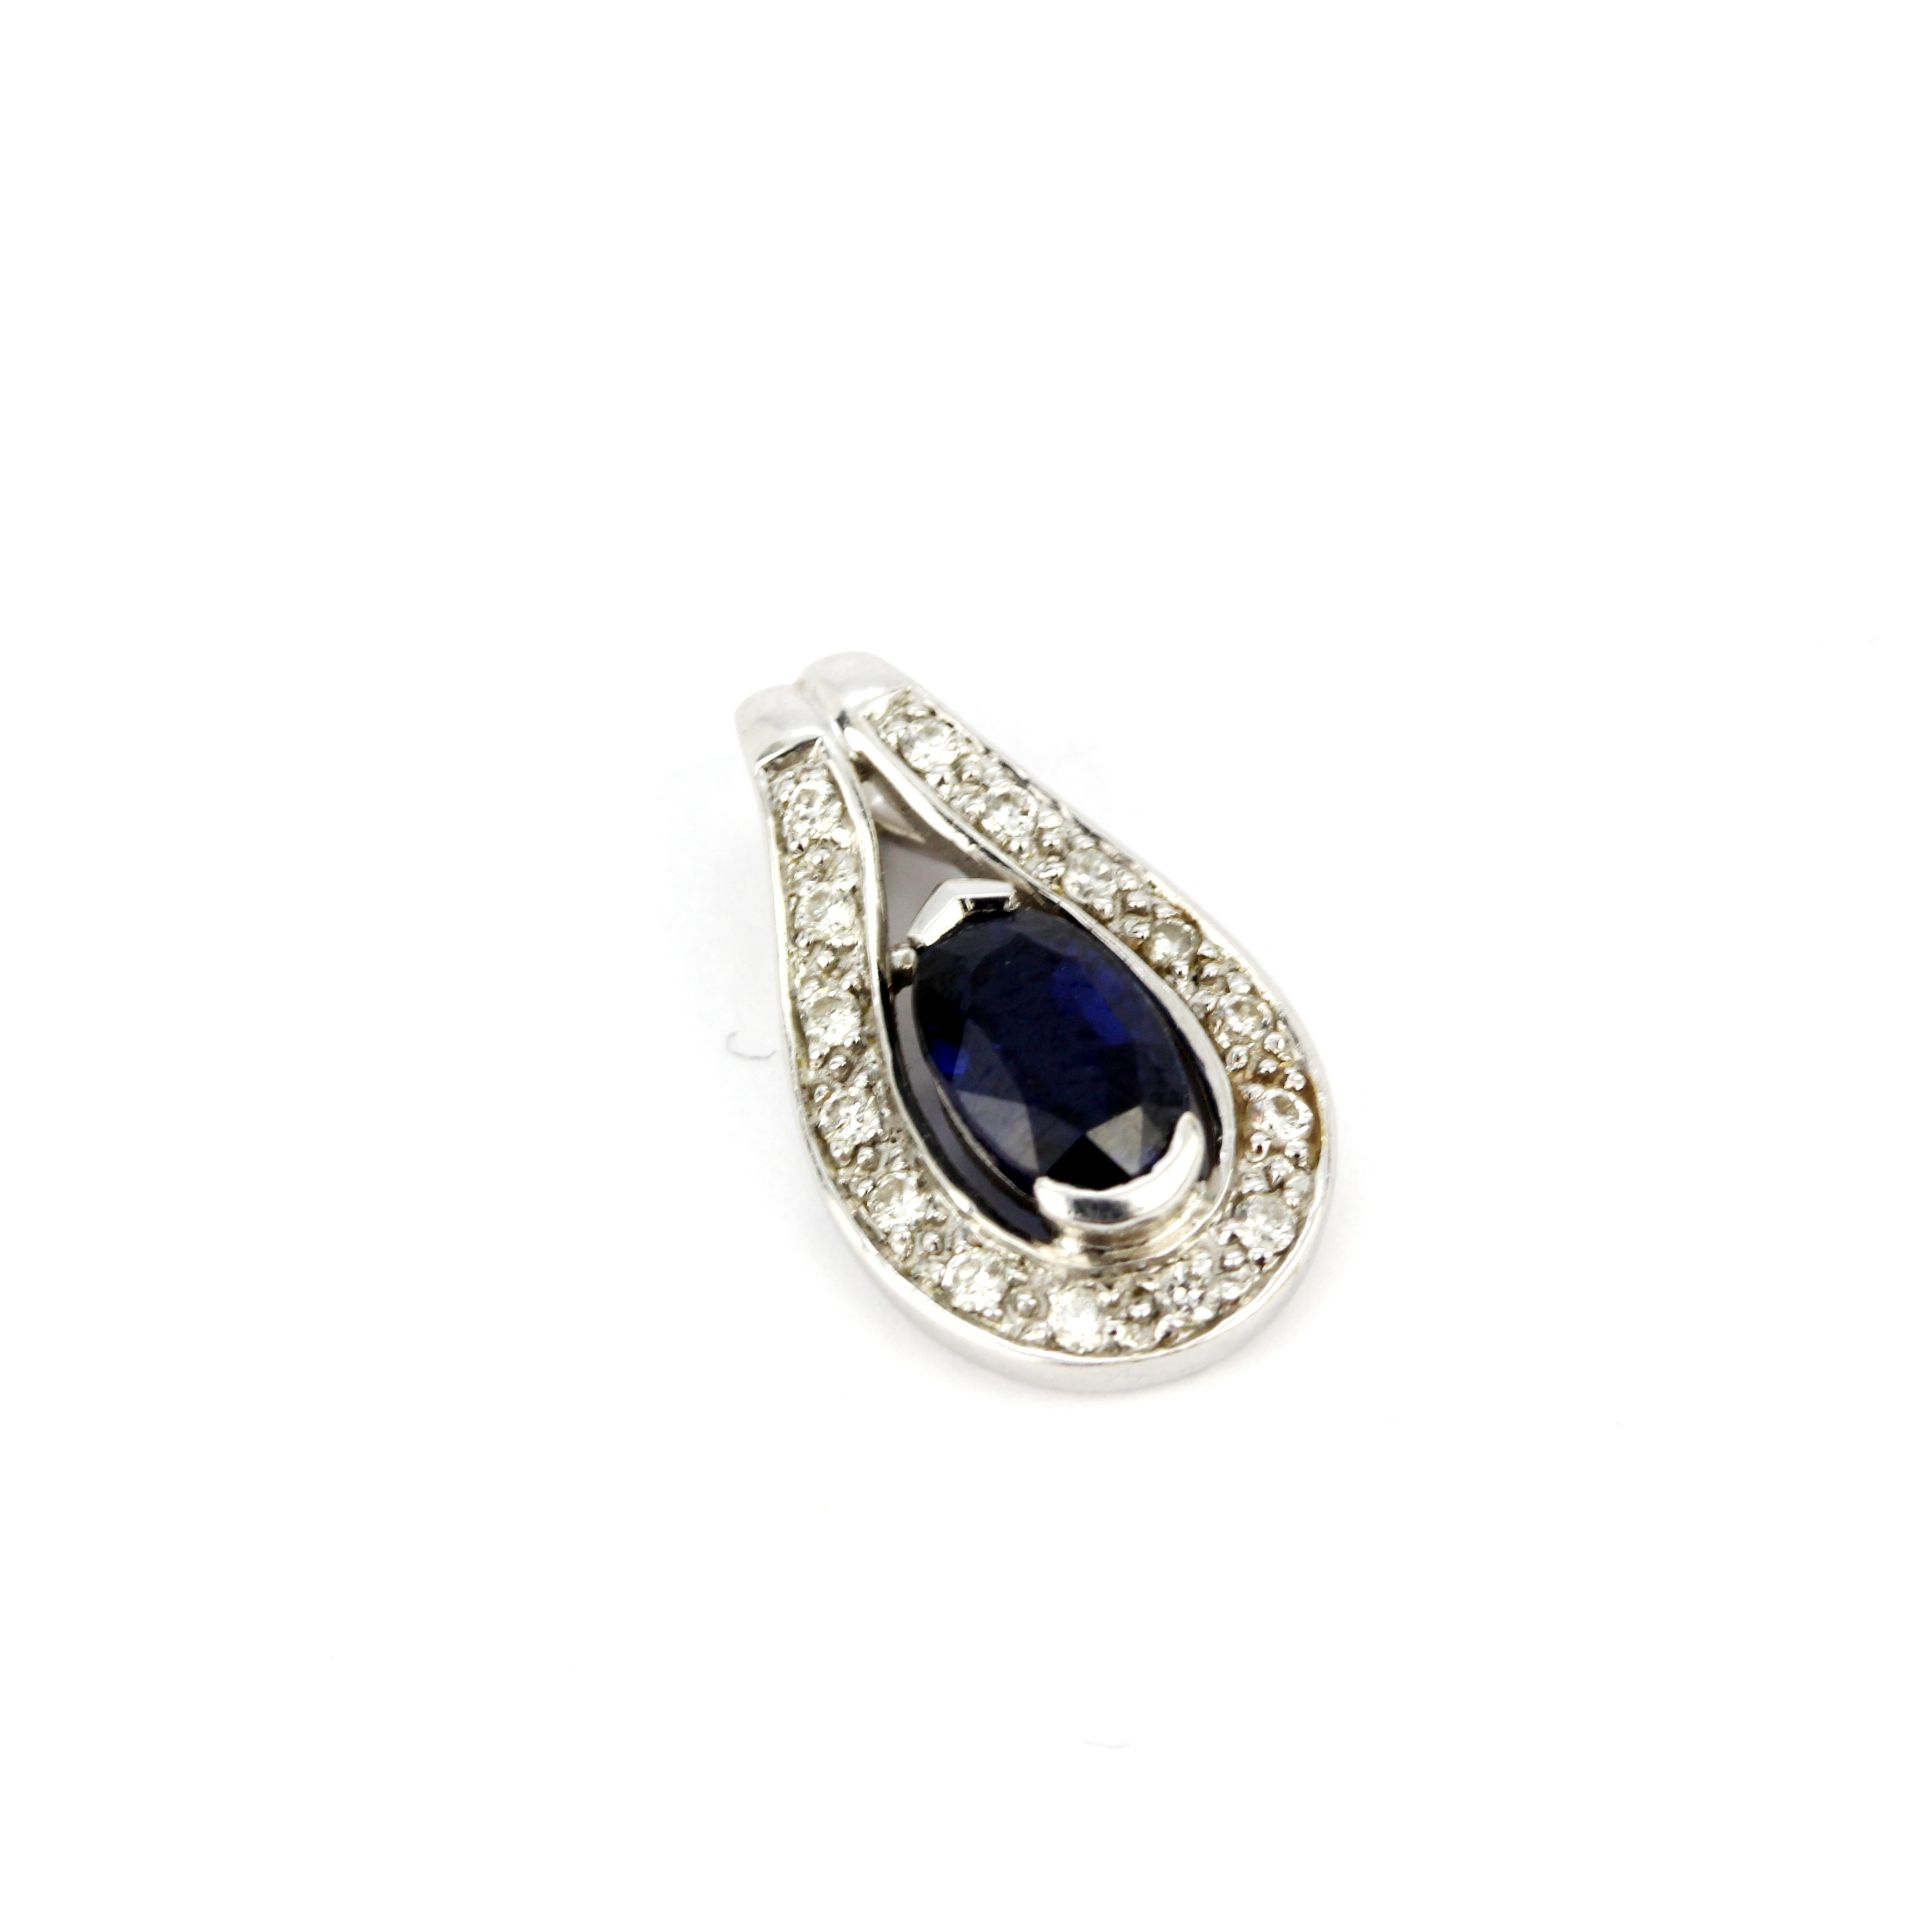 An 18ct white gold pendant set with an oval cut sapphire surrounded by diamonds, L. 1.5cm. - Image 3 of 3